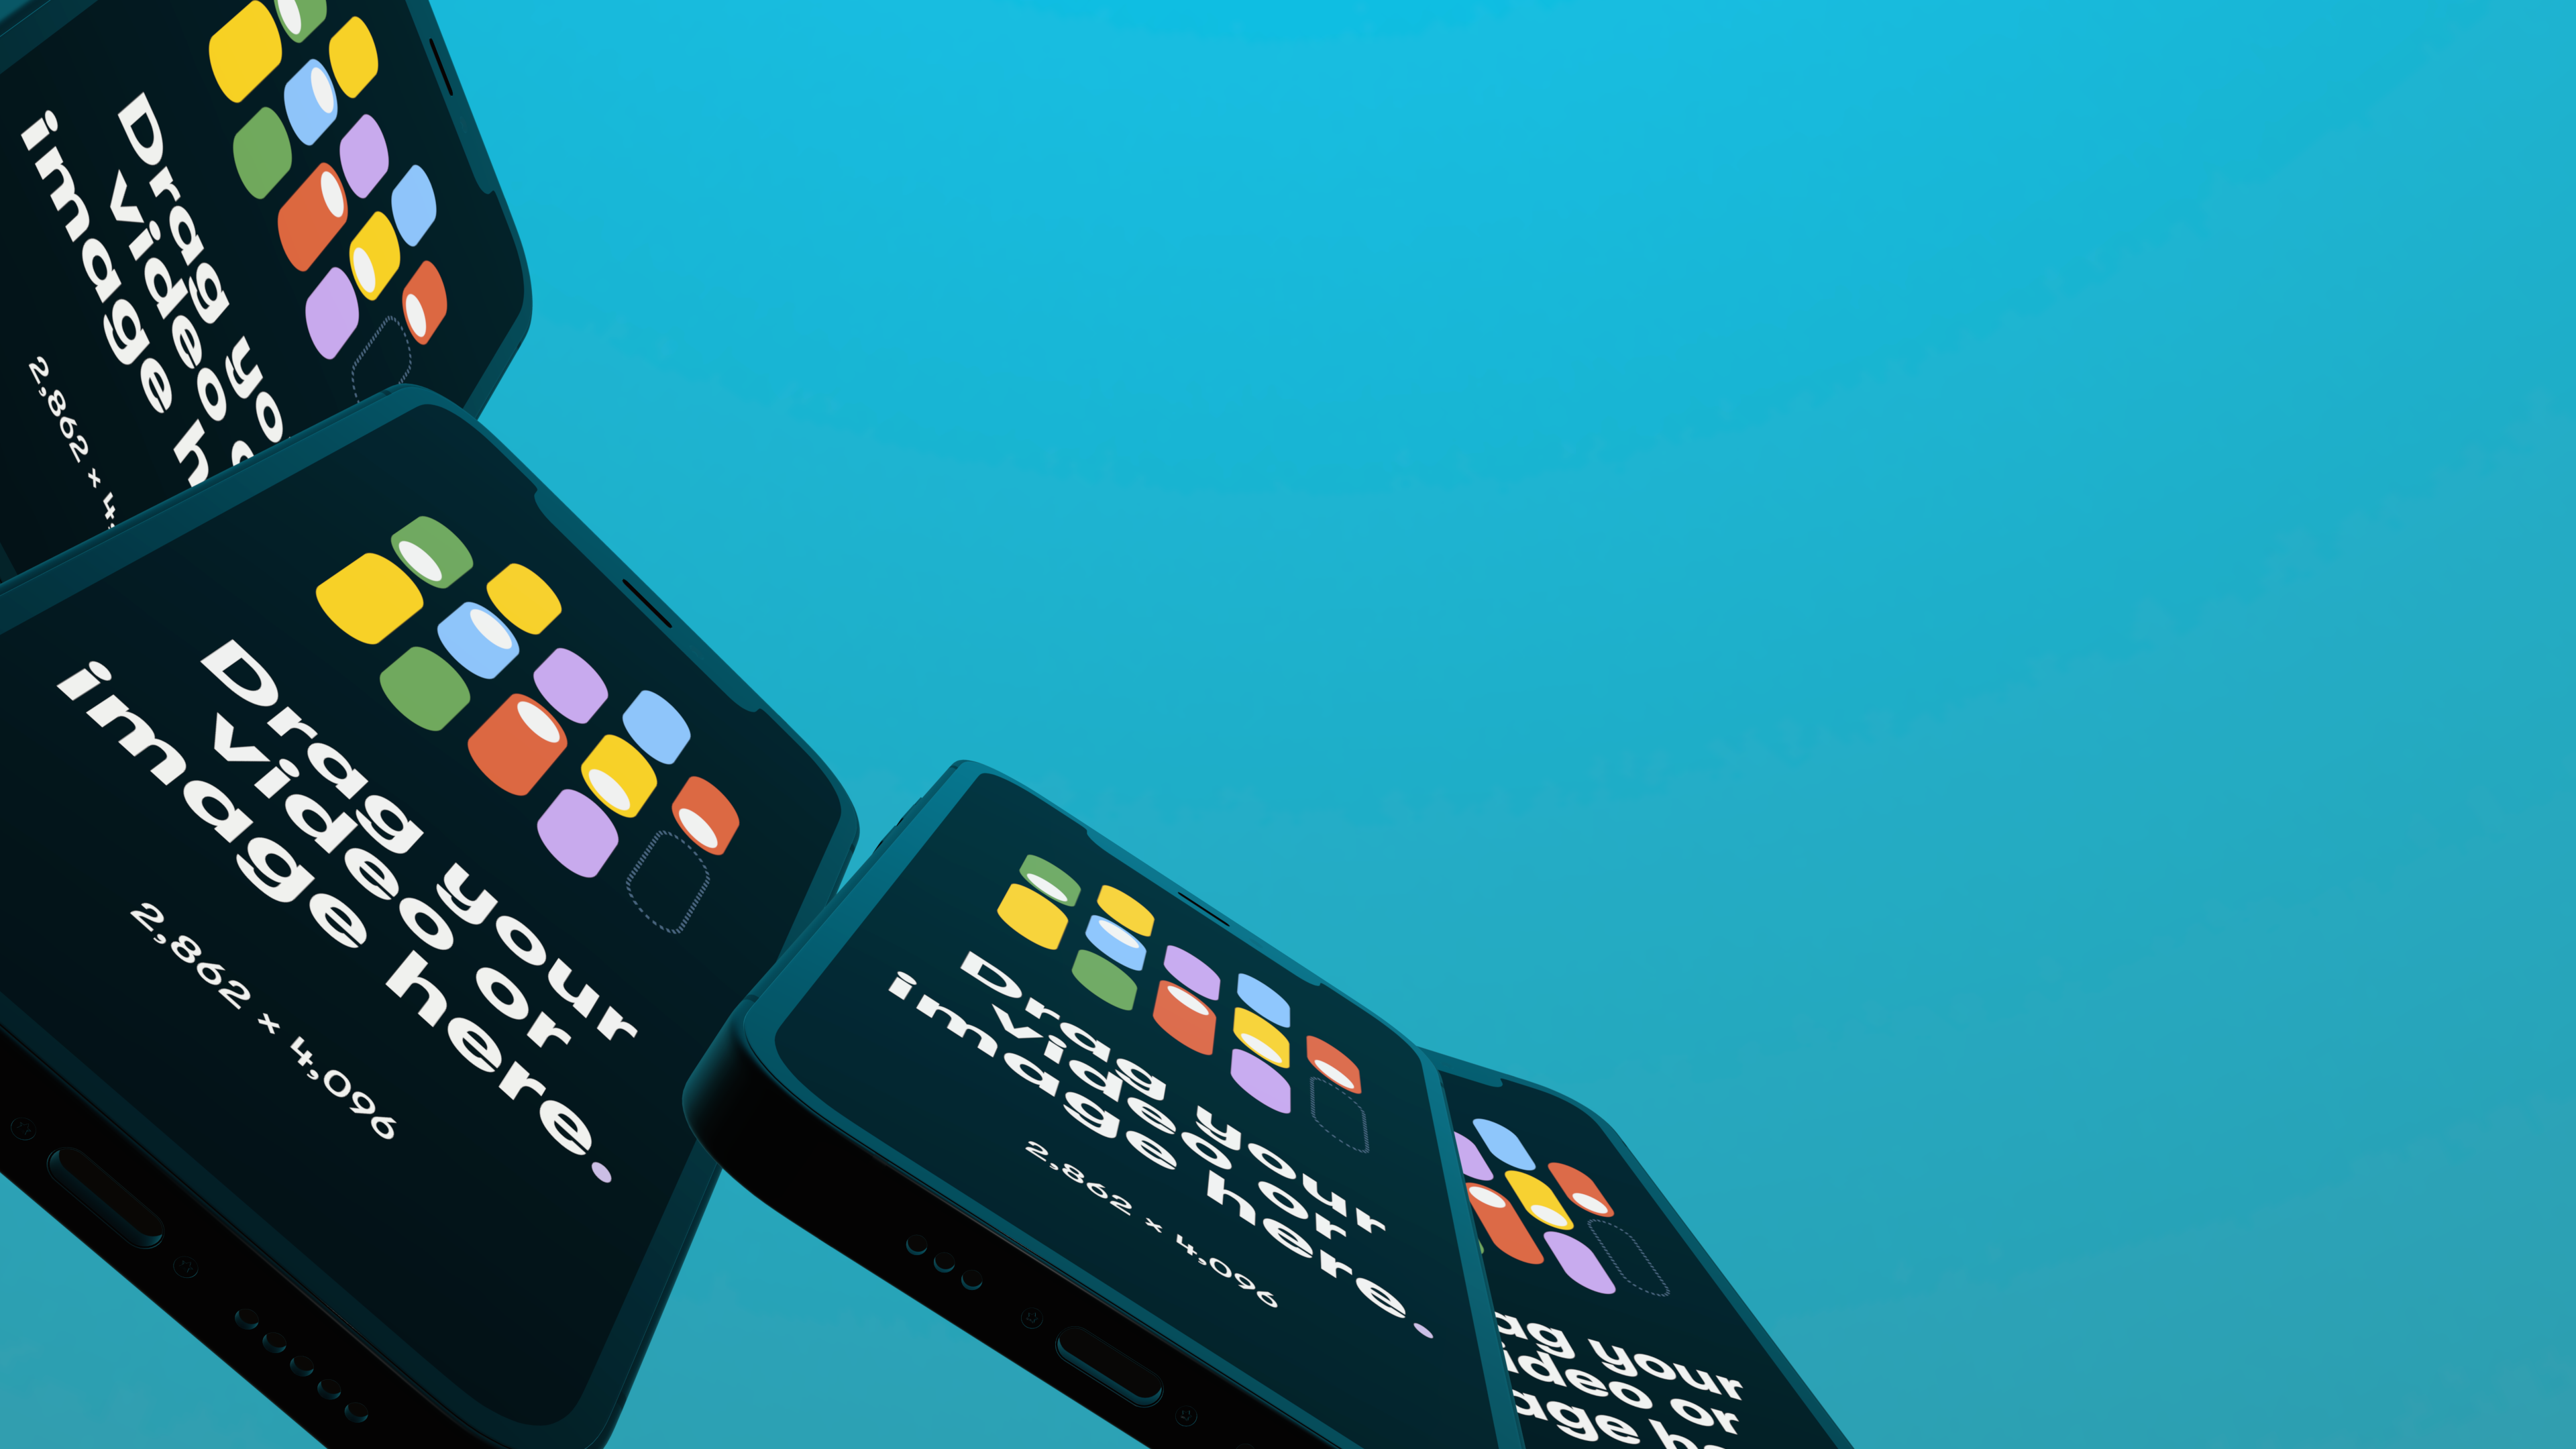 iPhones floating on a teal background and with teal light bounce